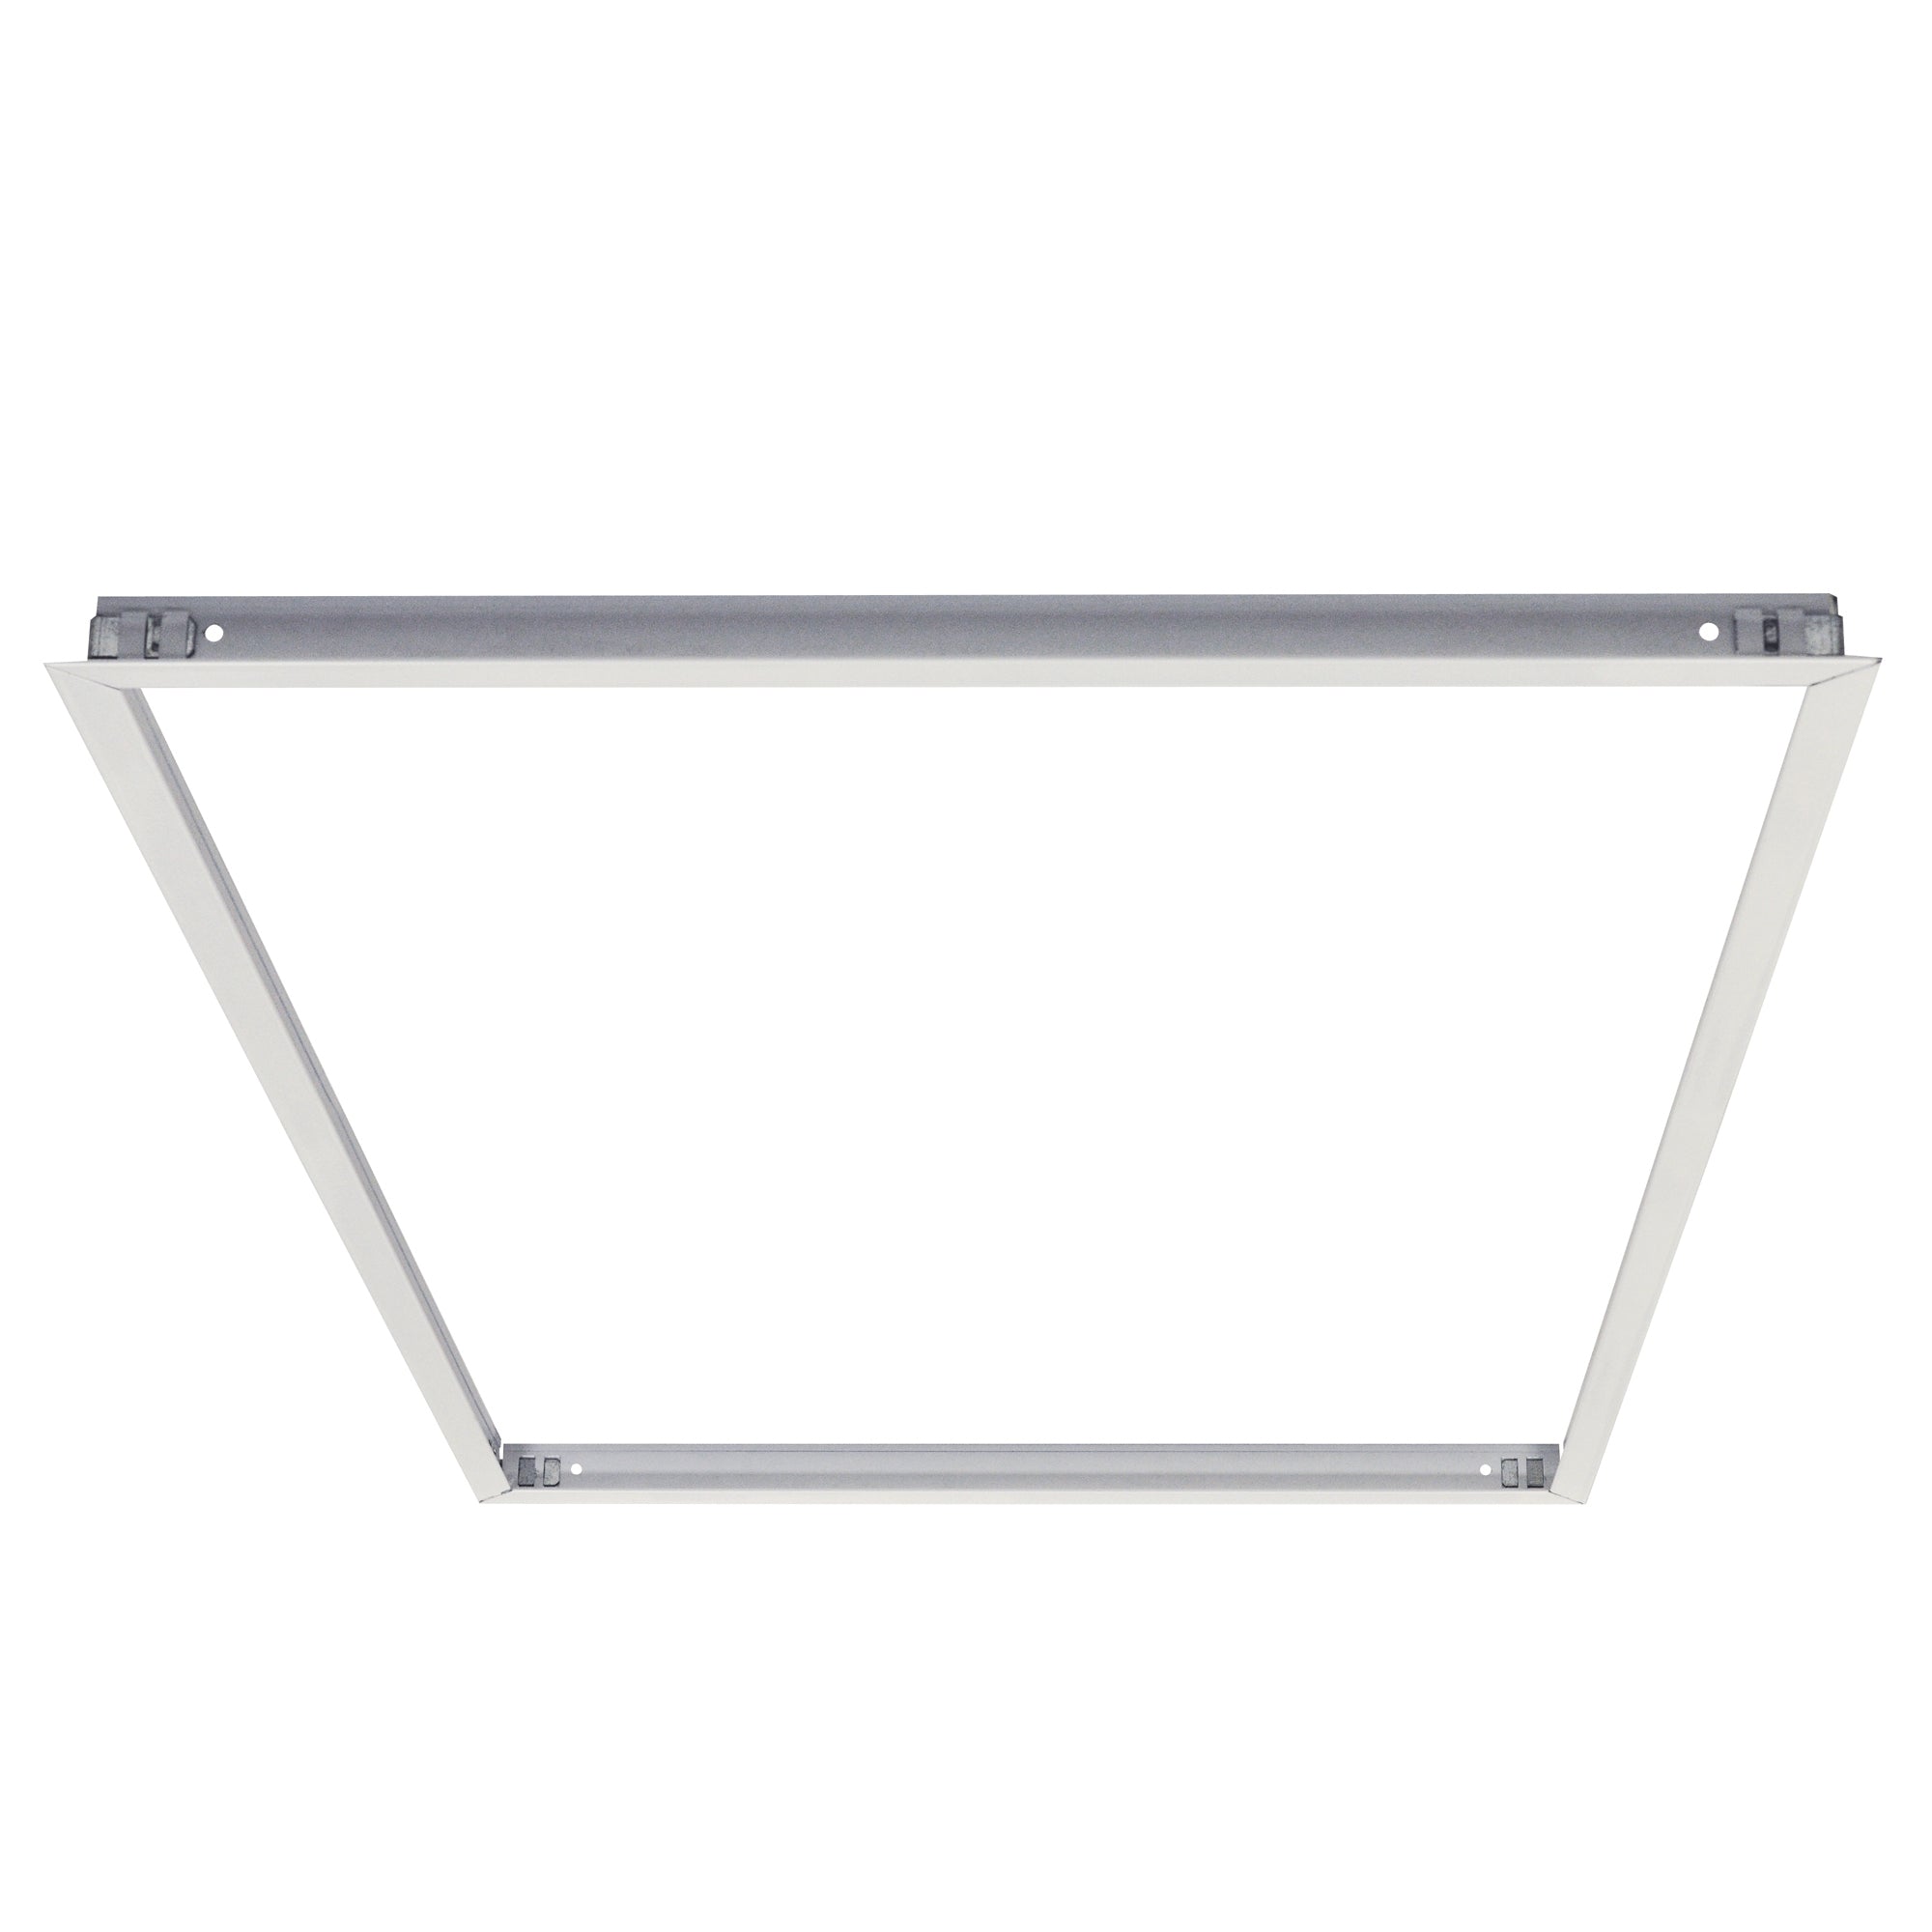 Nora Lighting NPDBL-24RFK/W - Recessed - Recessed Mounting Kit for 2'x4' LED Backlit Panels